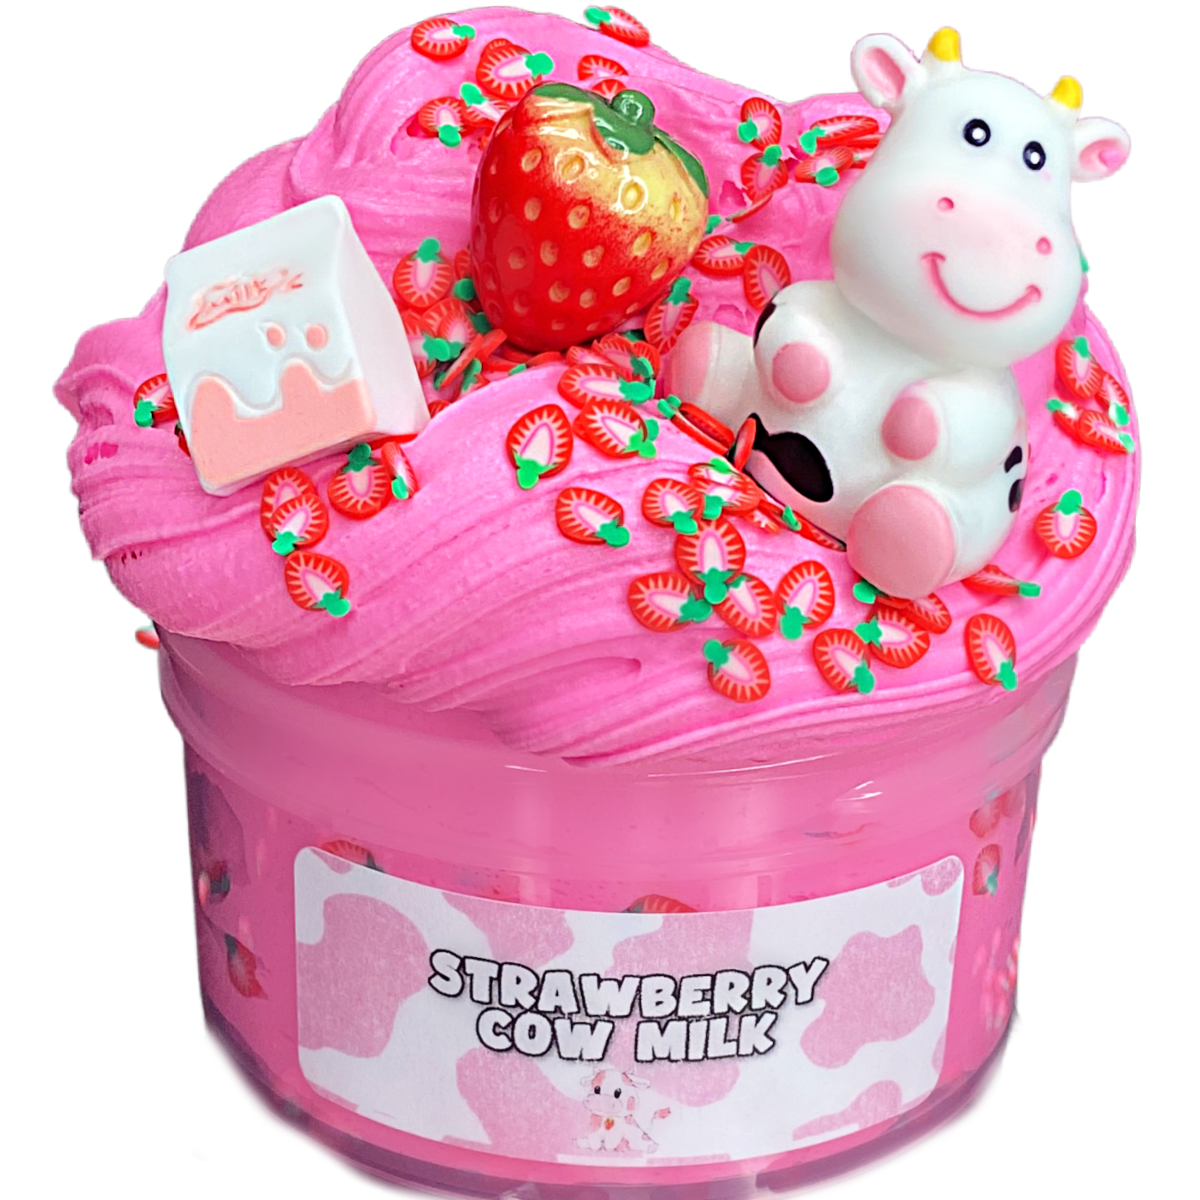 Strawberry Cow Slime